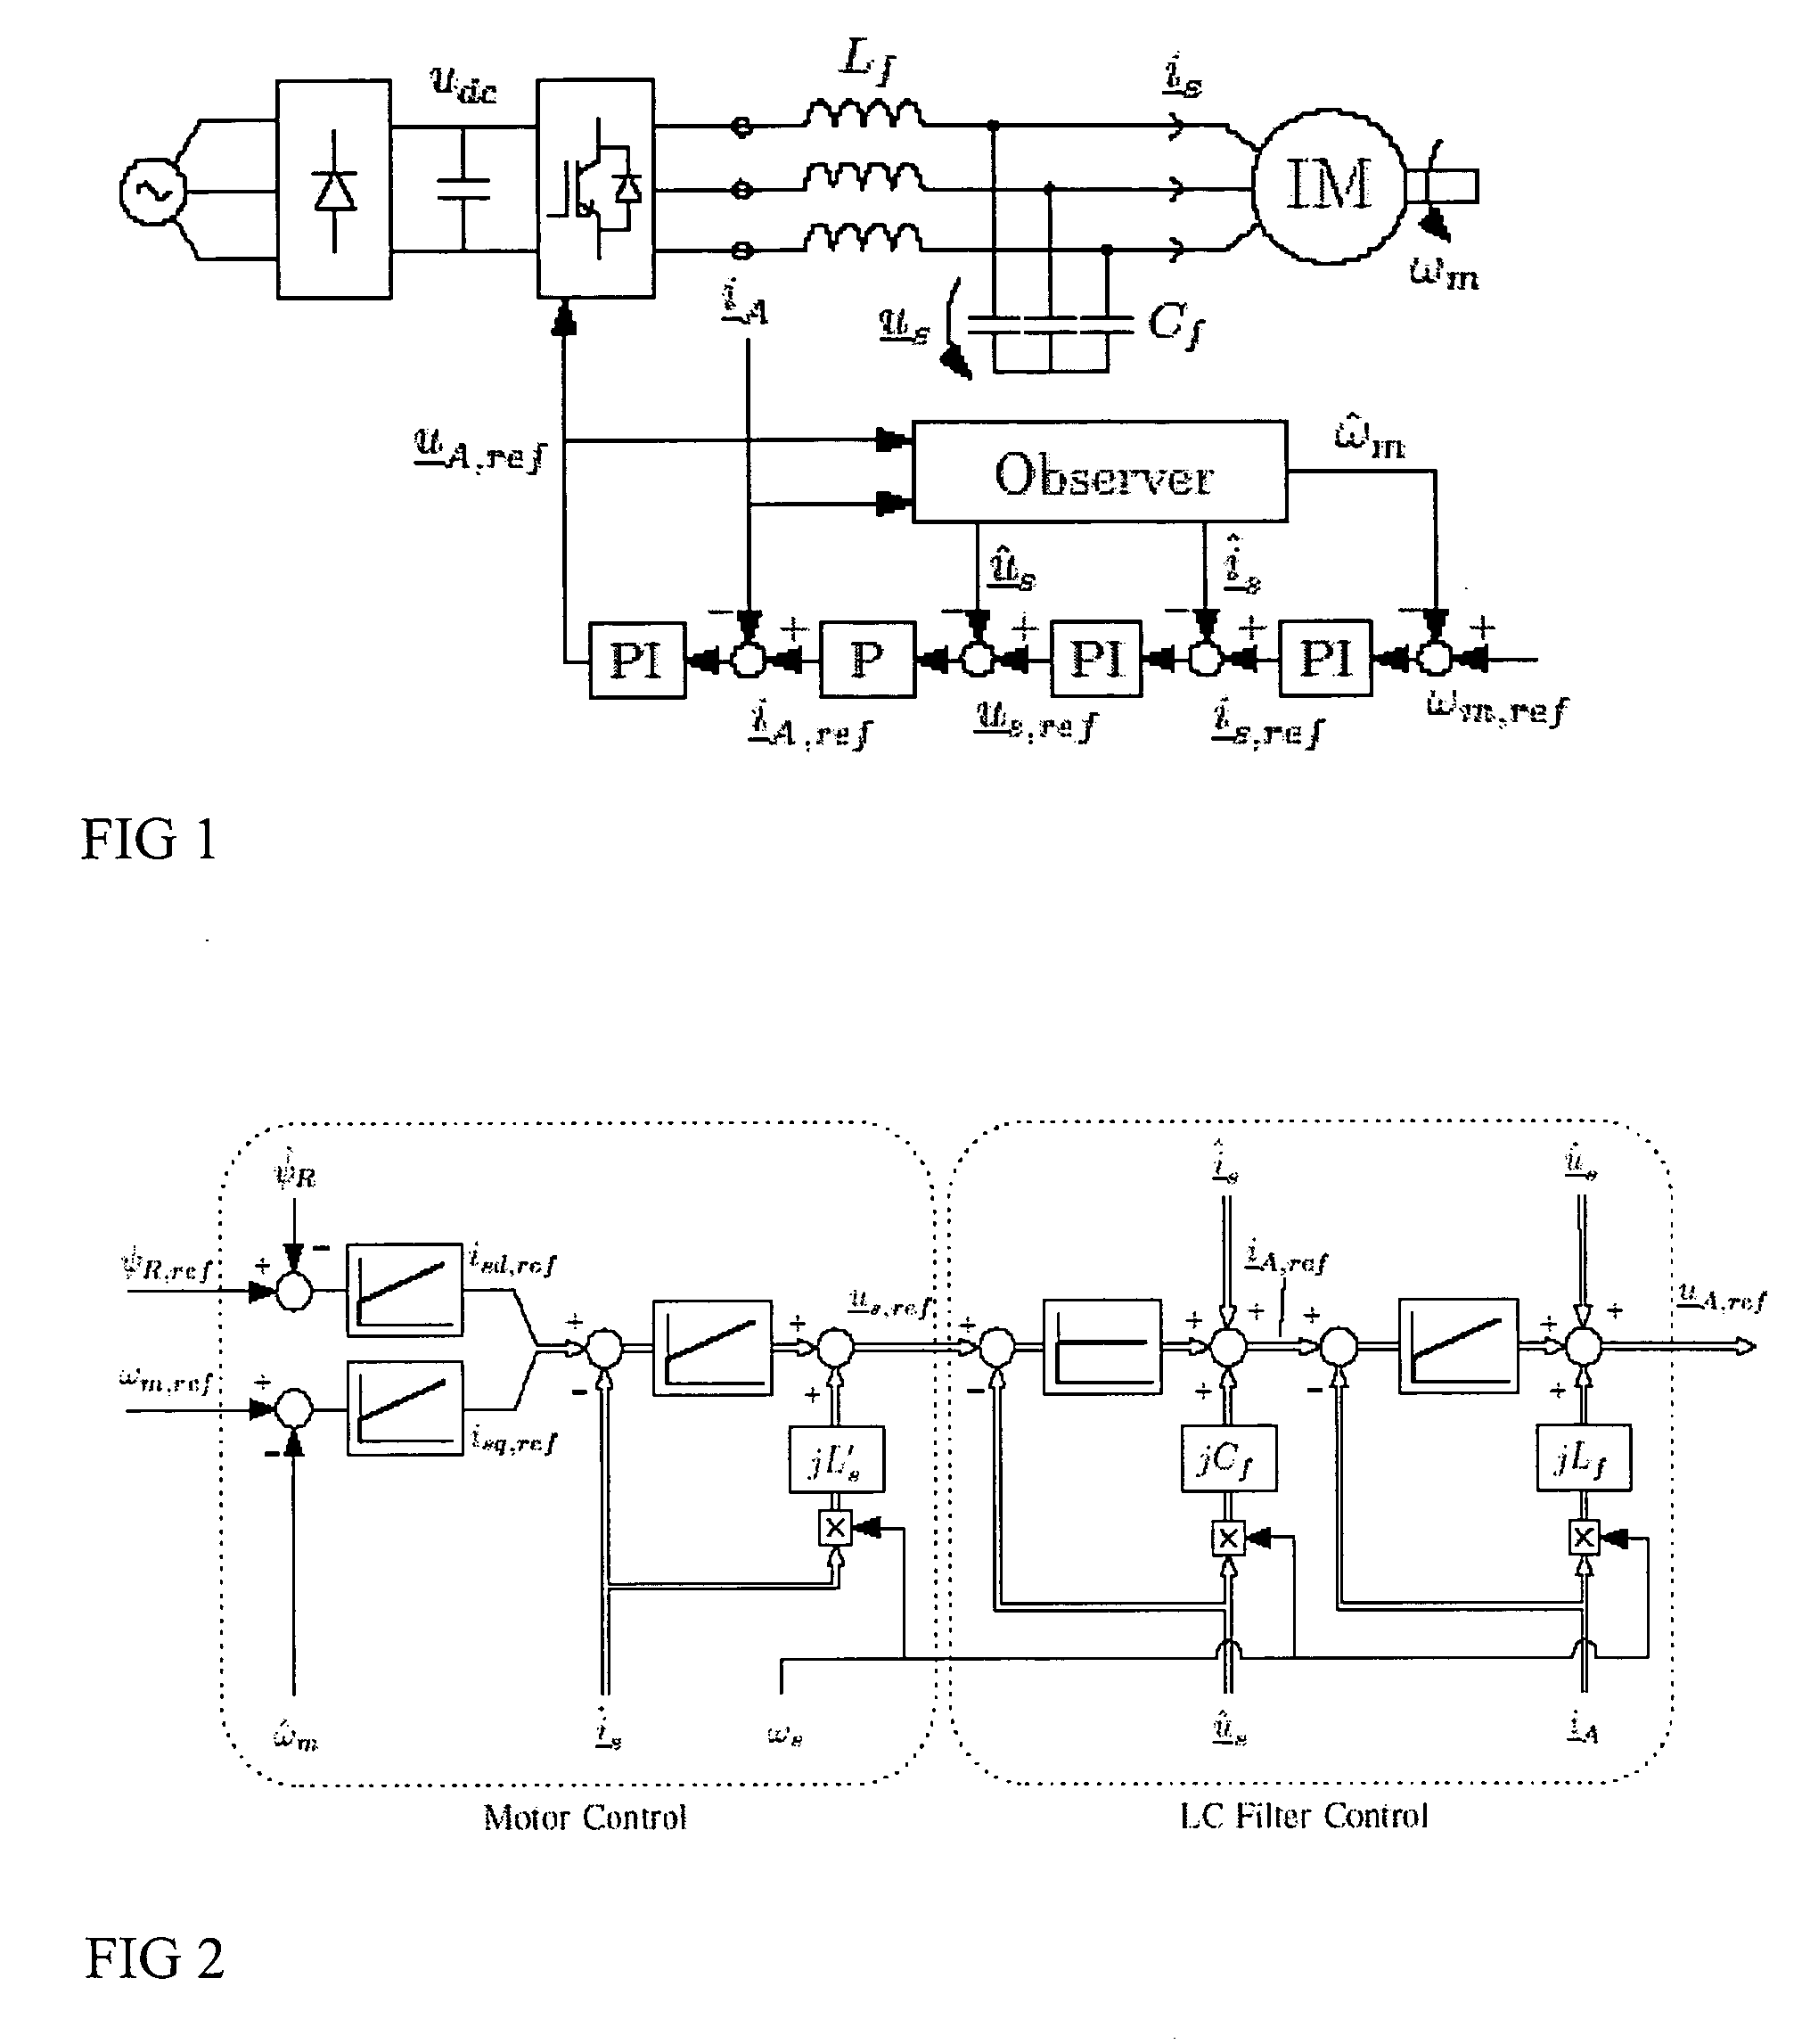 Speed sensorless control of an induction machine using a pwm inverter with output lc filter